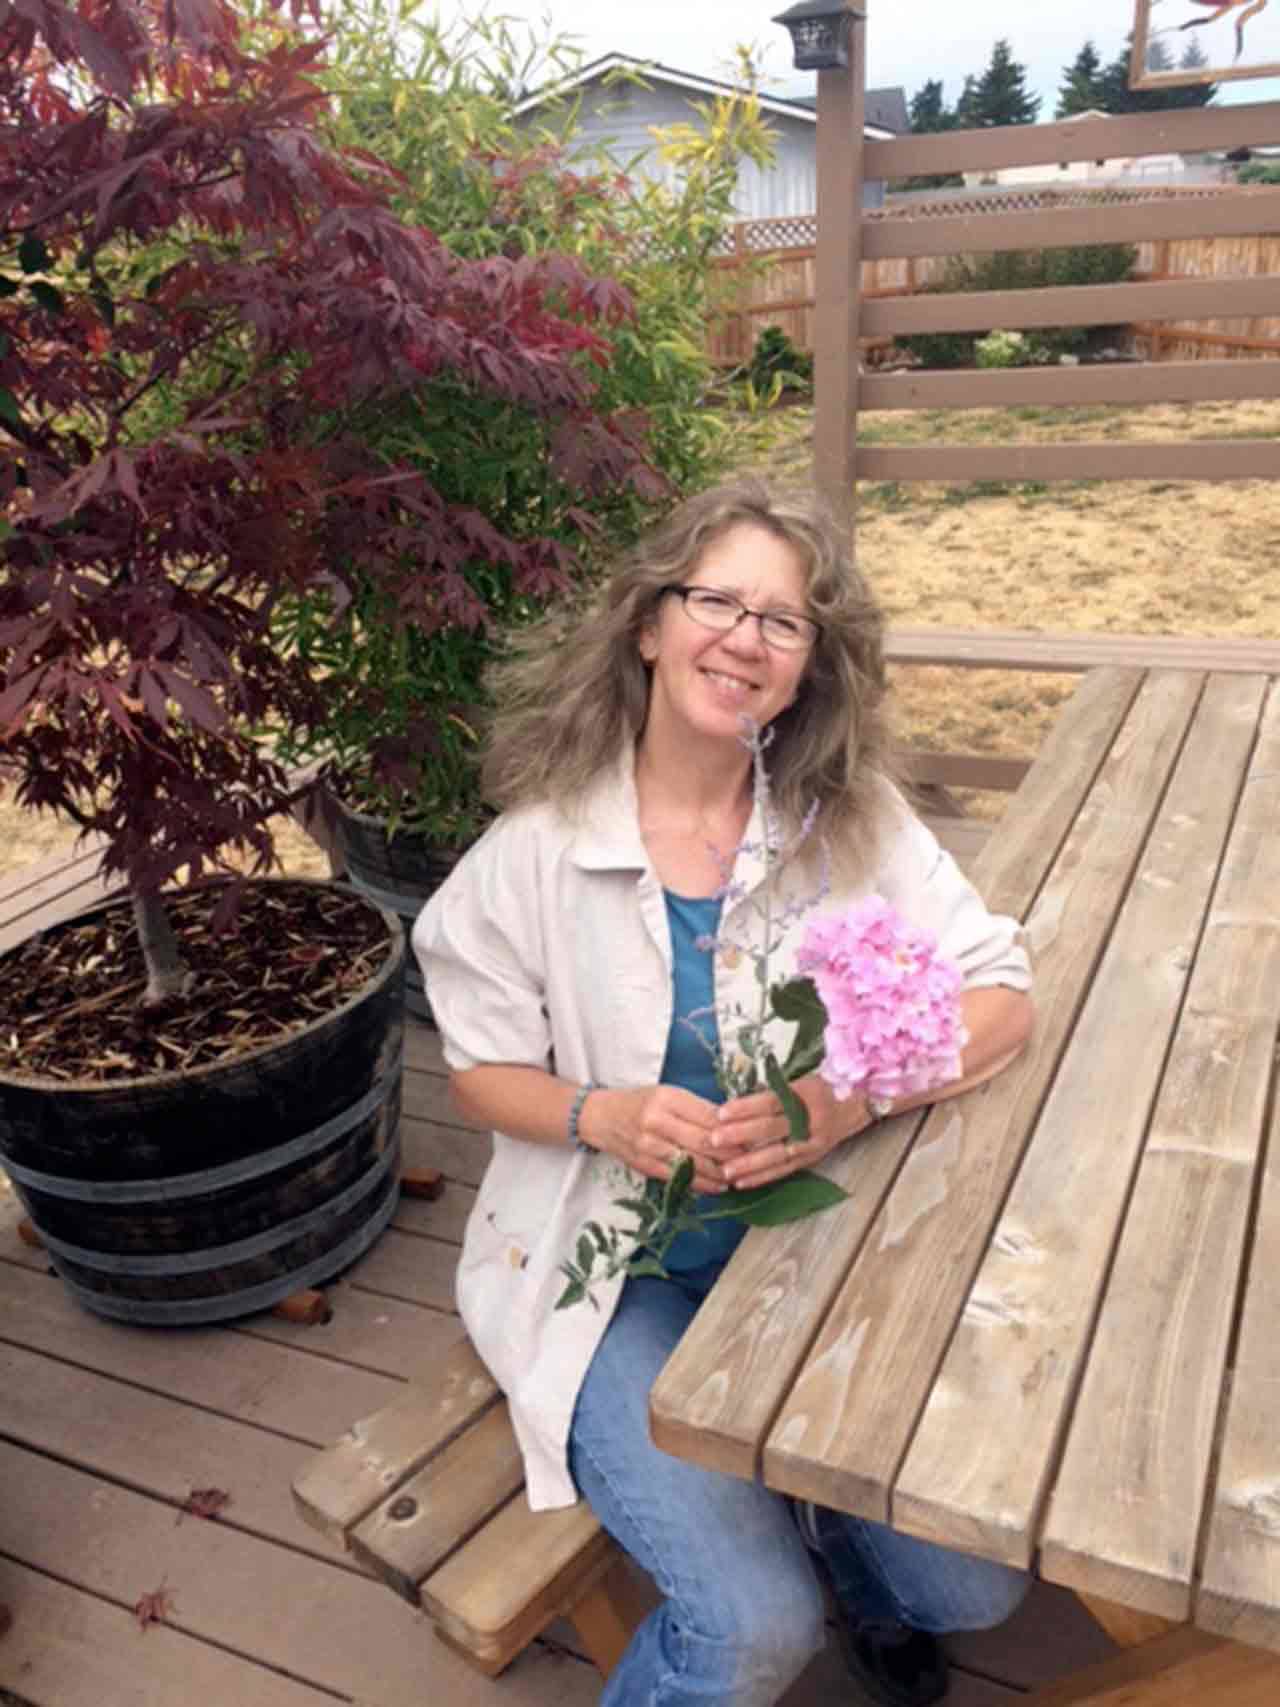 Master Gardener Cathy Wagner will talk about flower arranging this Saturday in Sequim.